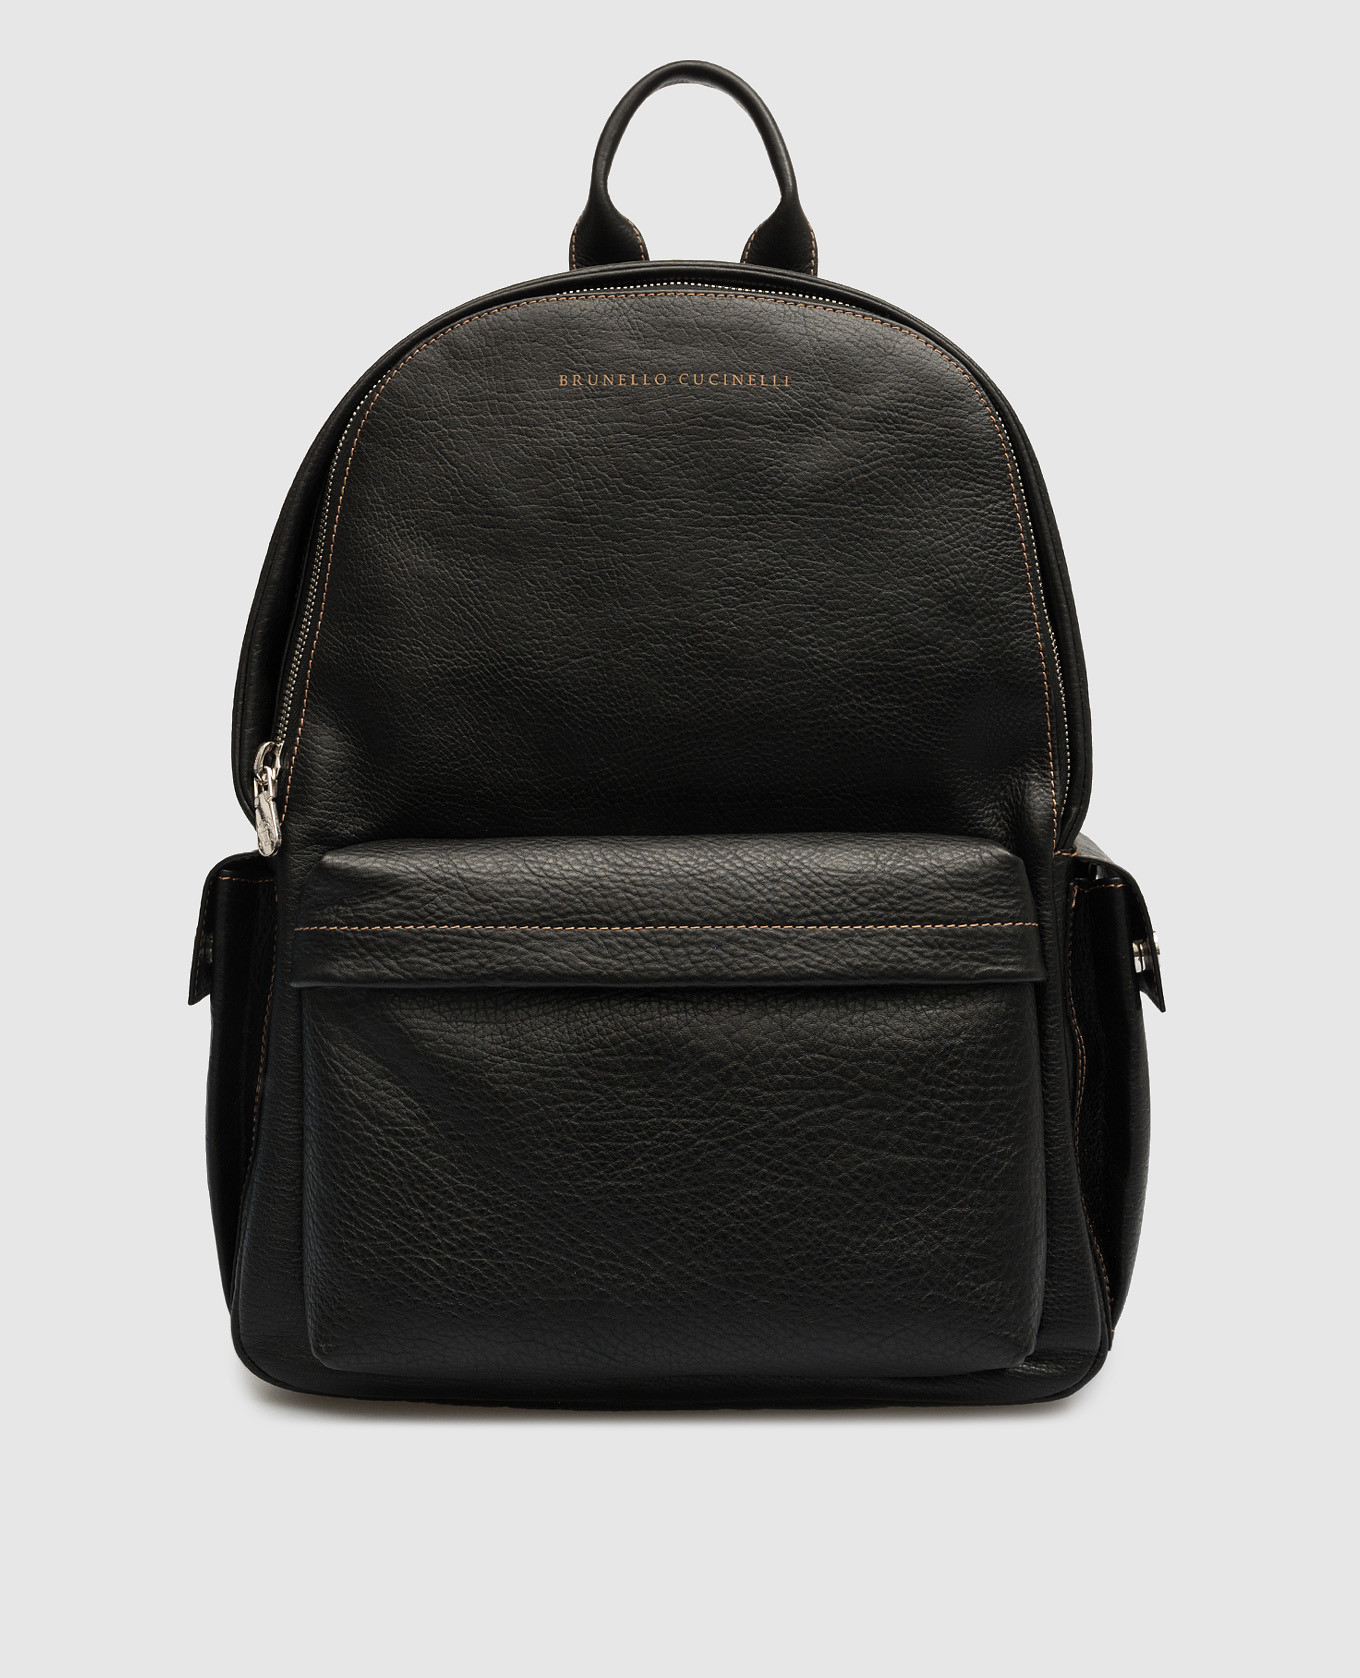 Black leather backpack with logo